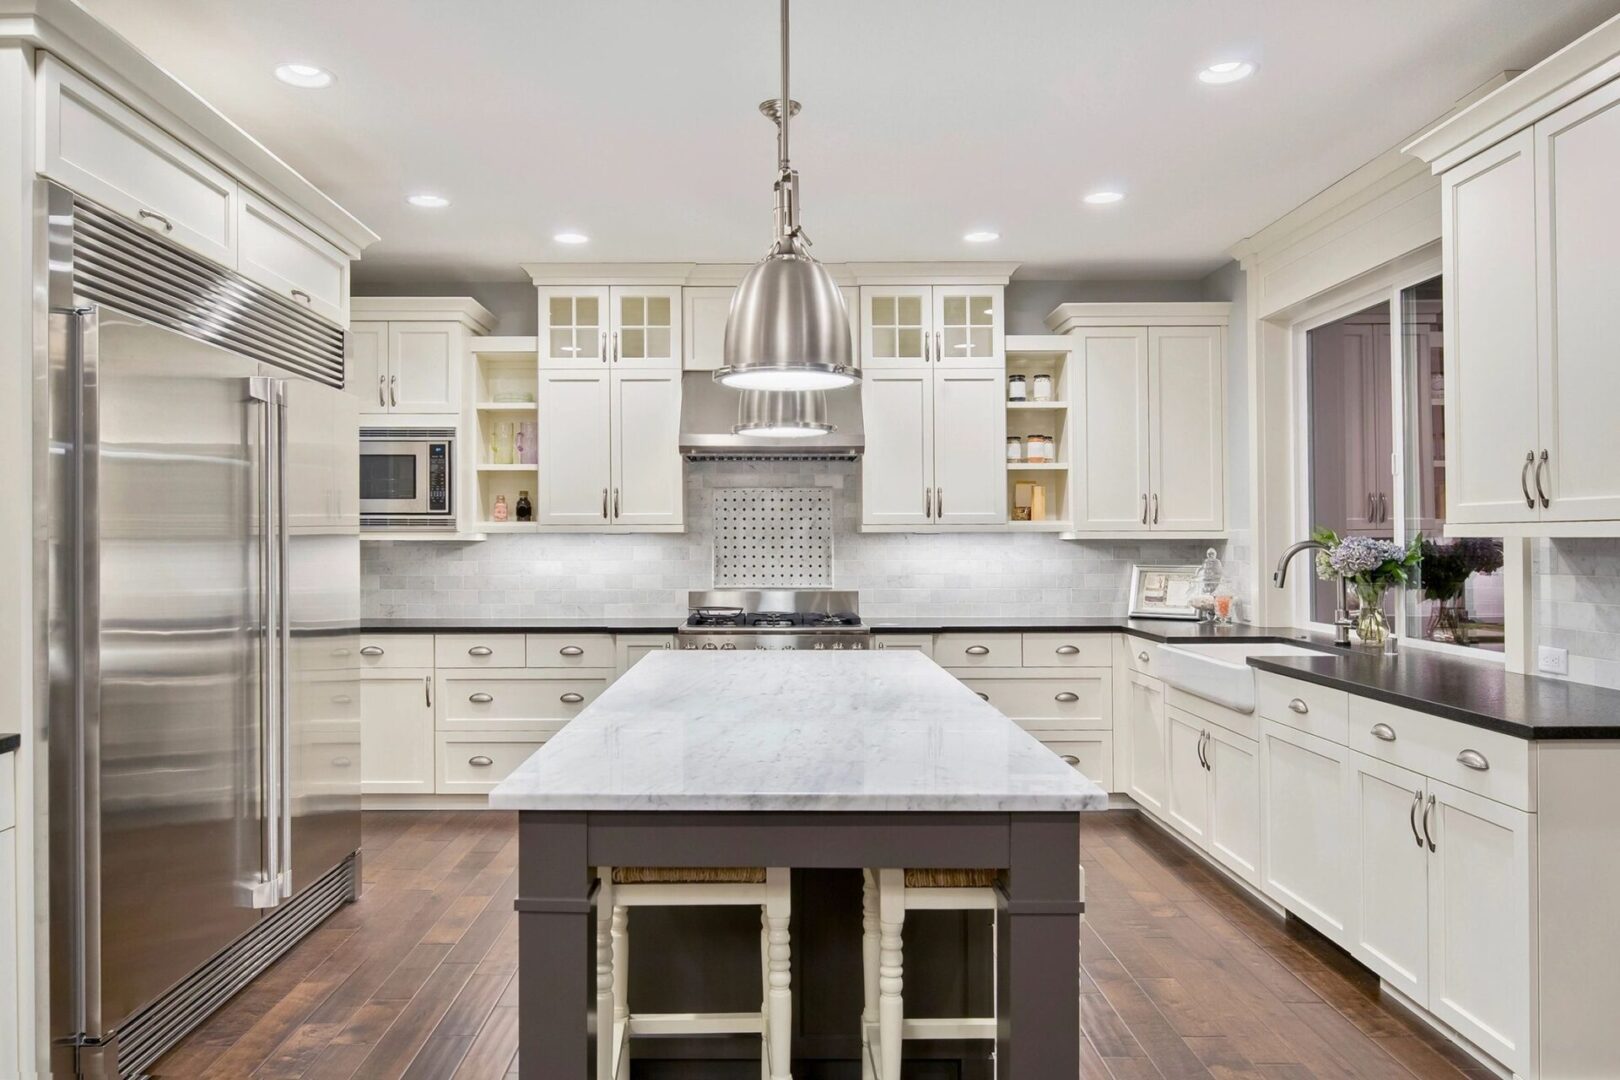 A large kitchen with white cabinets and wooden floors.